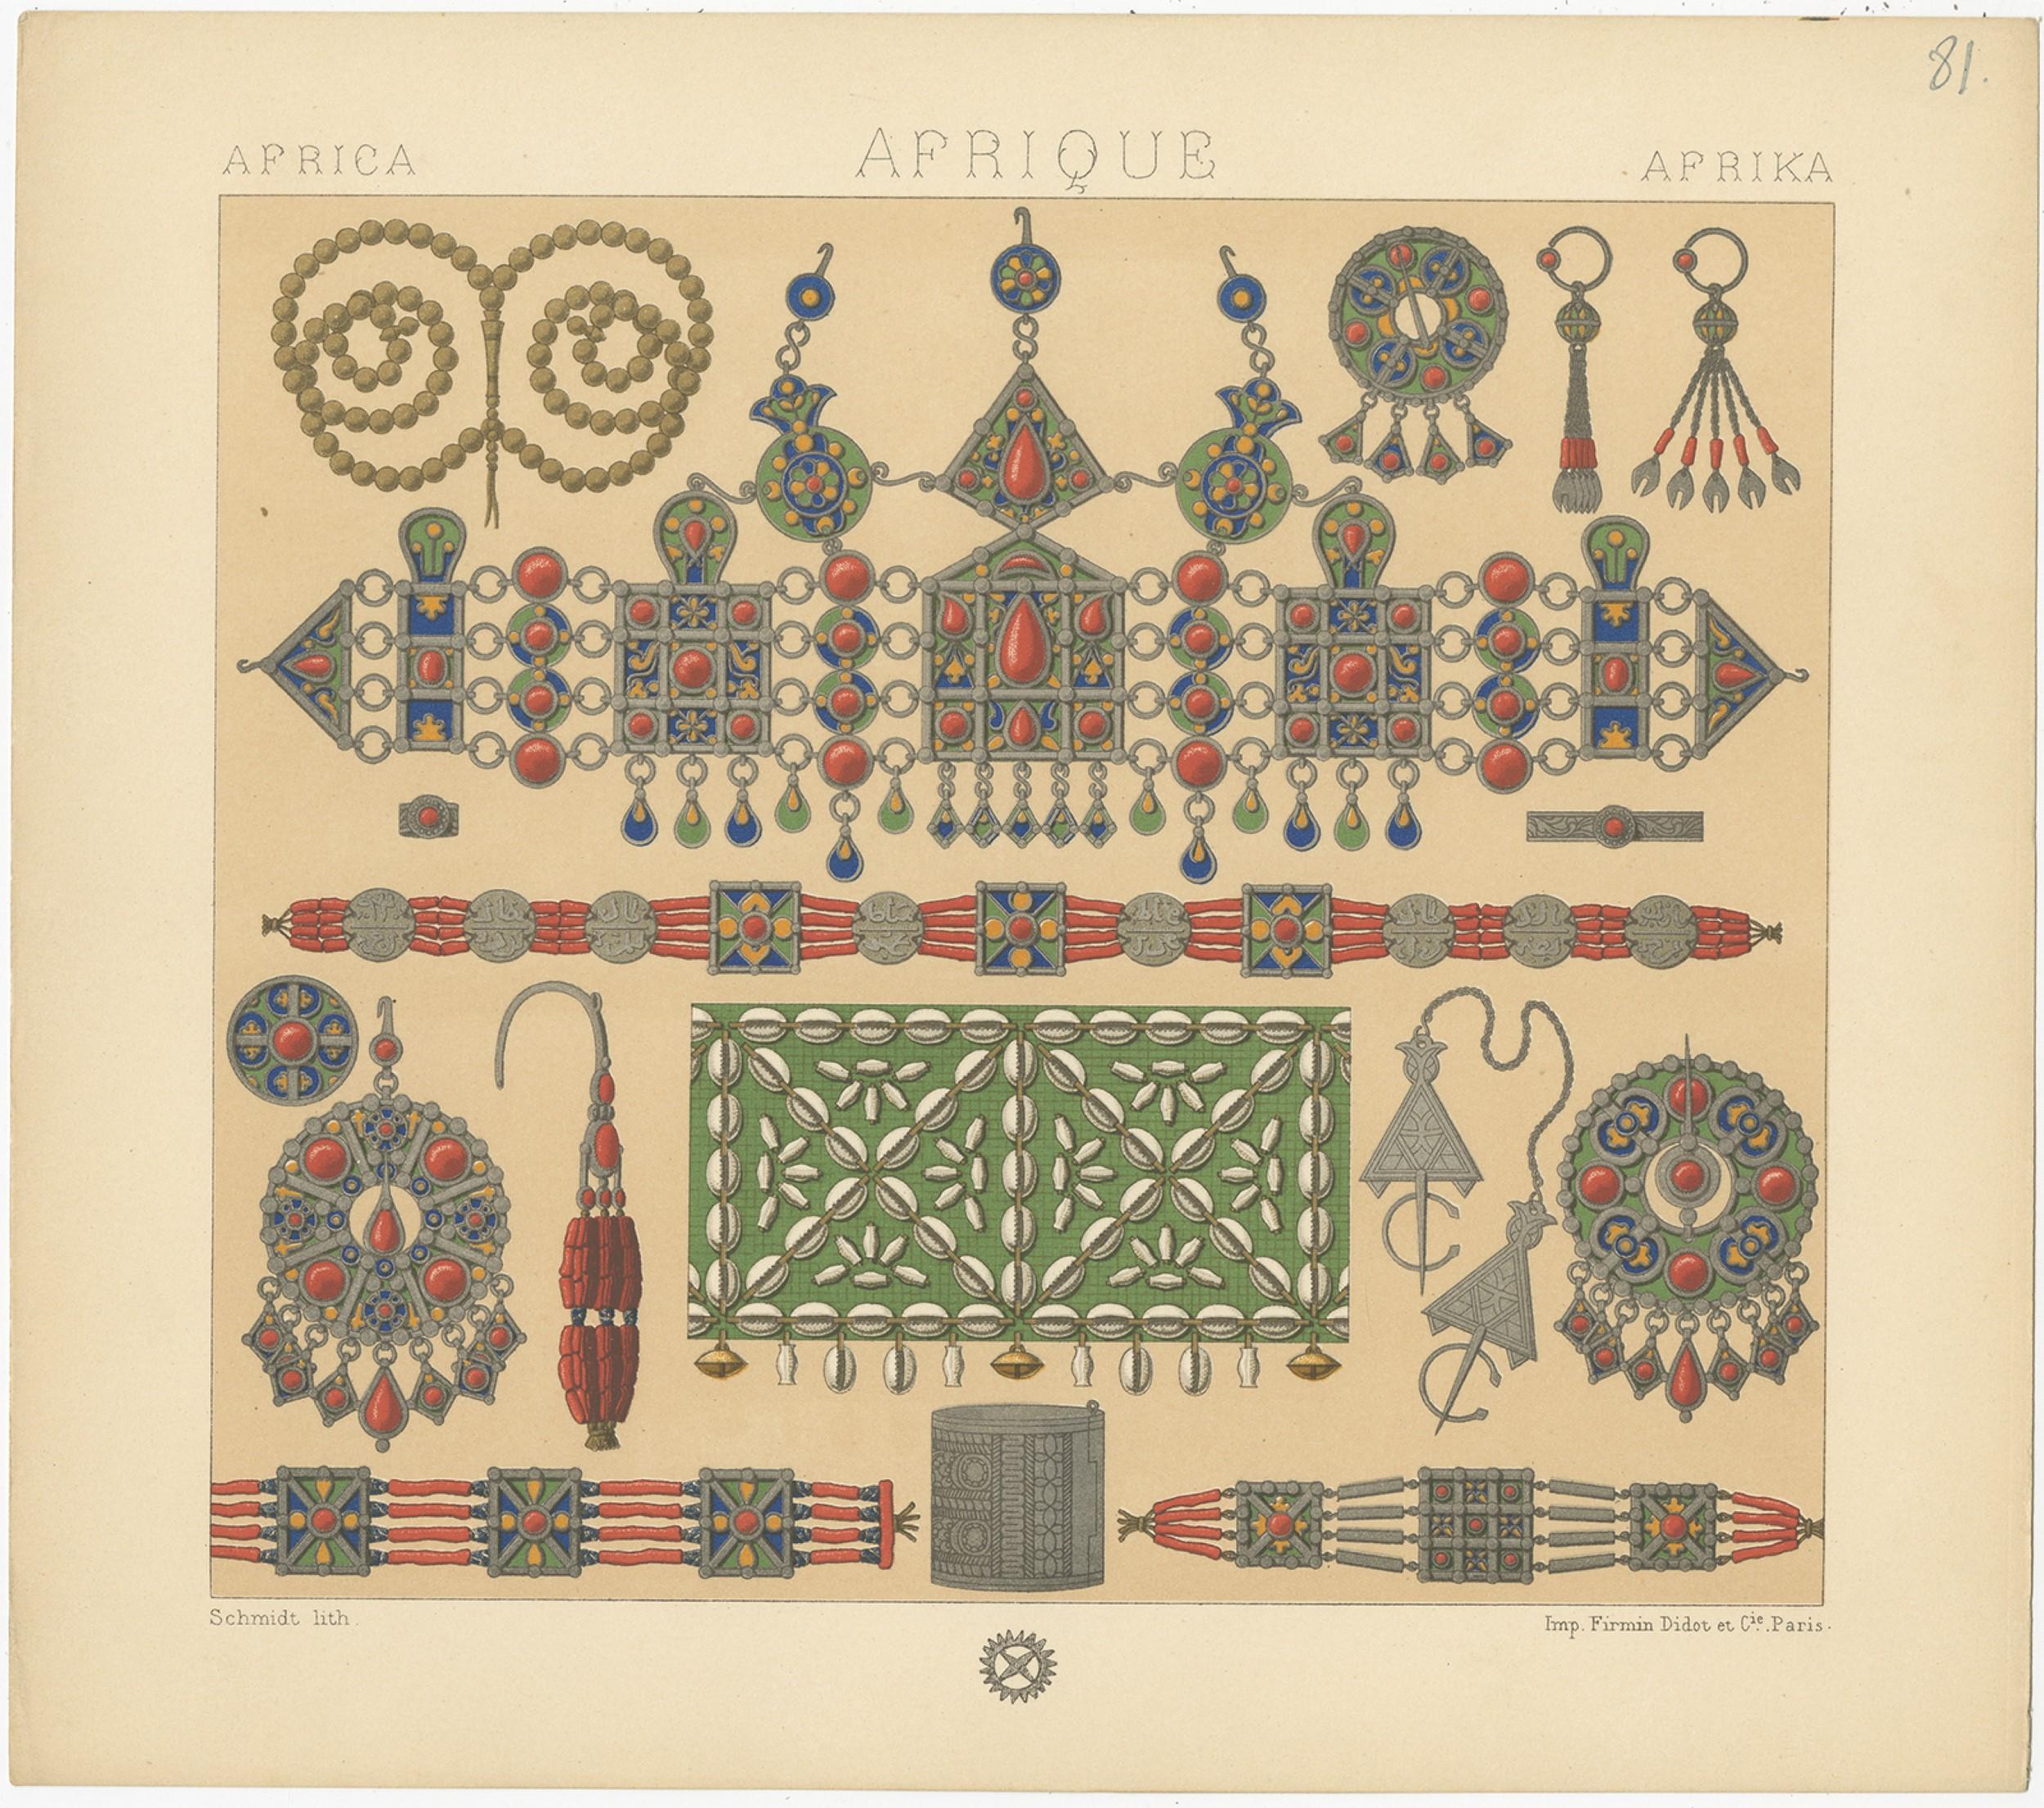 Antique print titled 'Africa - Afrique - Afrika'. Chromolithograph of African Decorative Objects. This print originates from 'Le Costume Historique' by M.A. Racinet. Published, circa 1880.